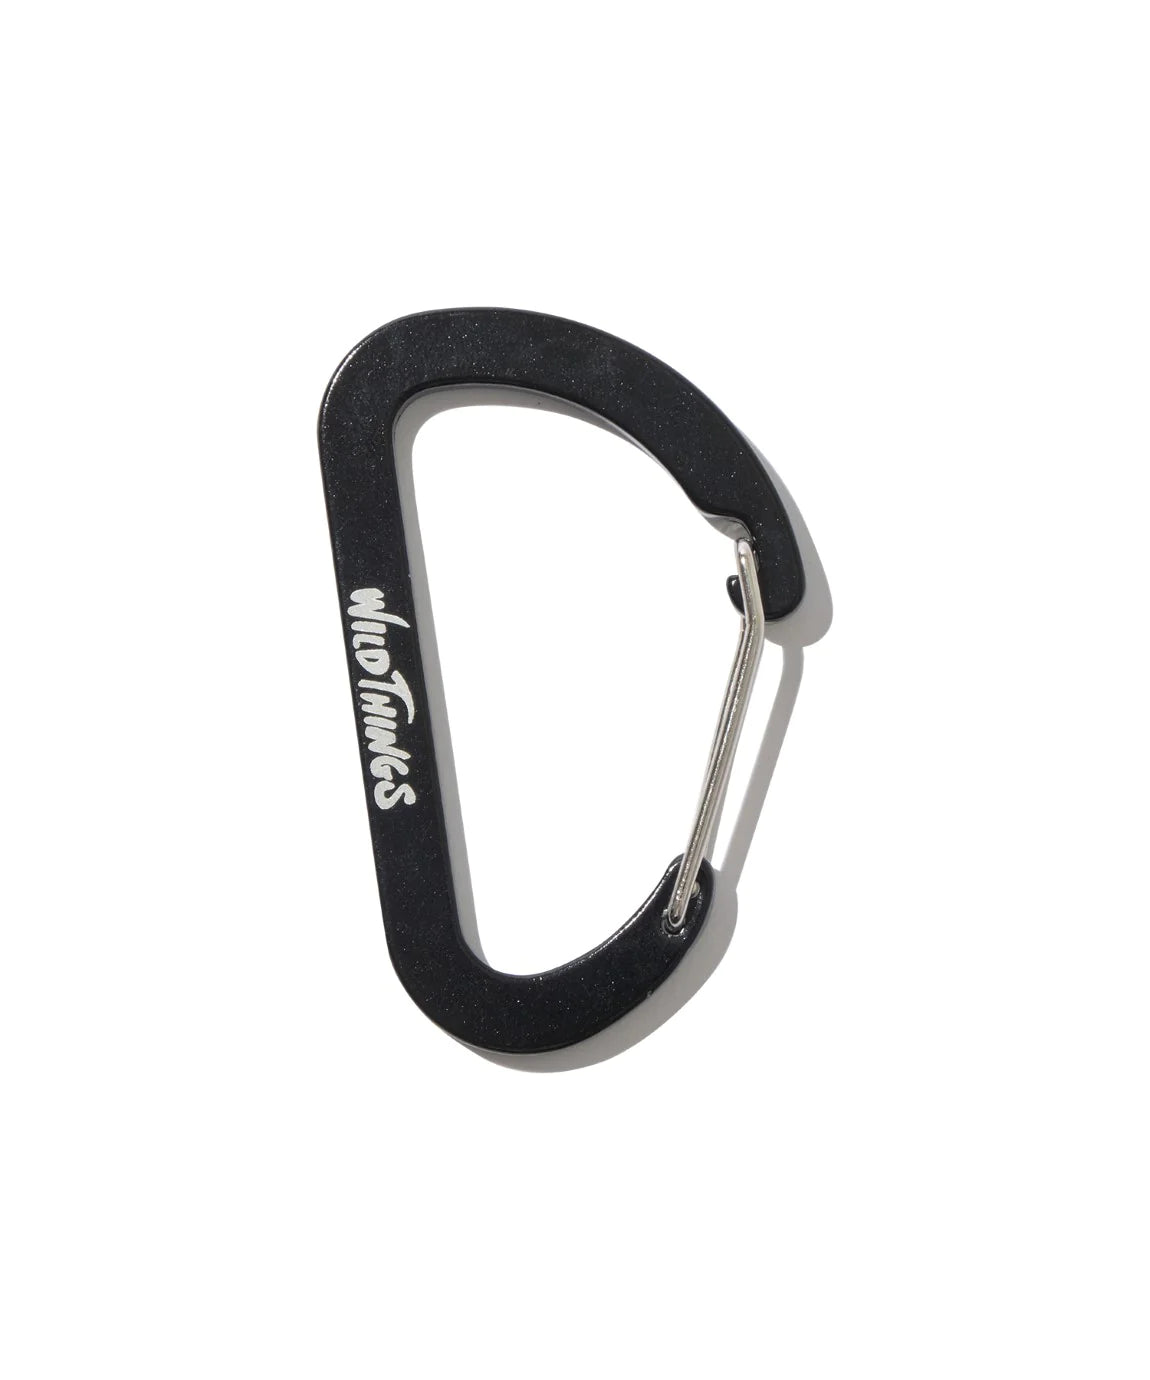 【WILD THINGS】THE PX CARABINER M｜カラビナ M 30%OFF